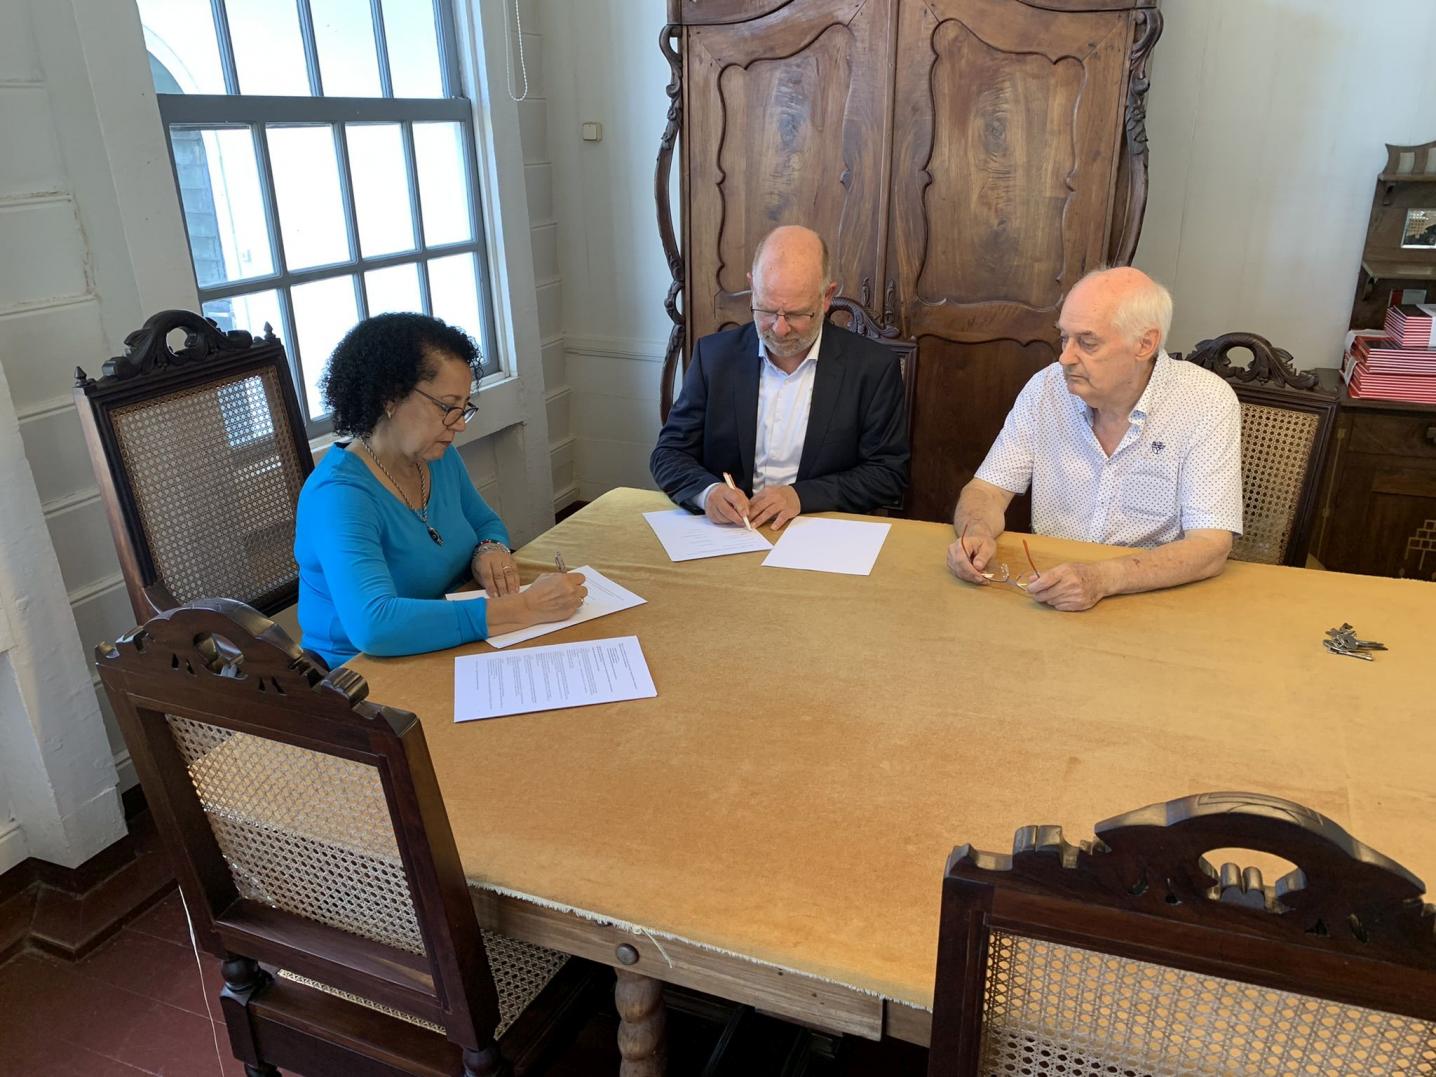 The Surinaams Museum and the National Archives of the Netherlands sign the agreement on 23 June 2022. 